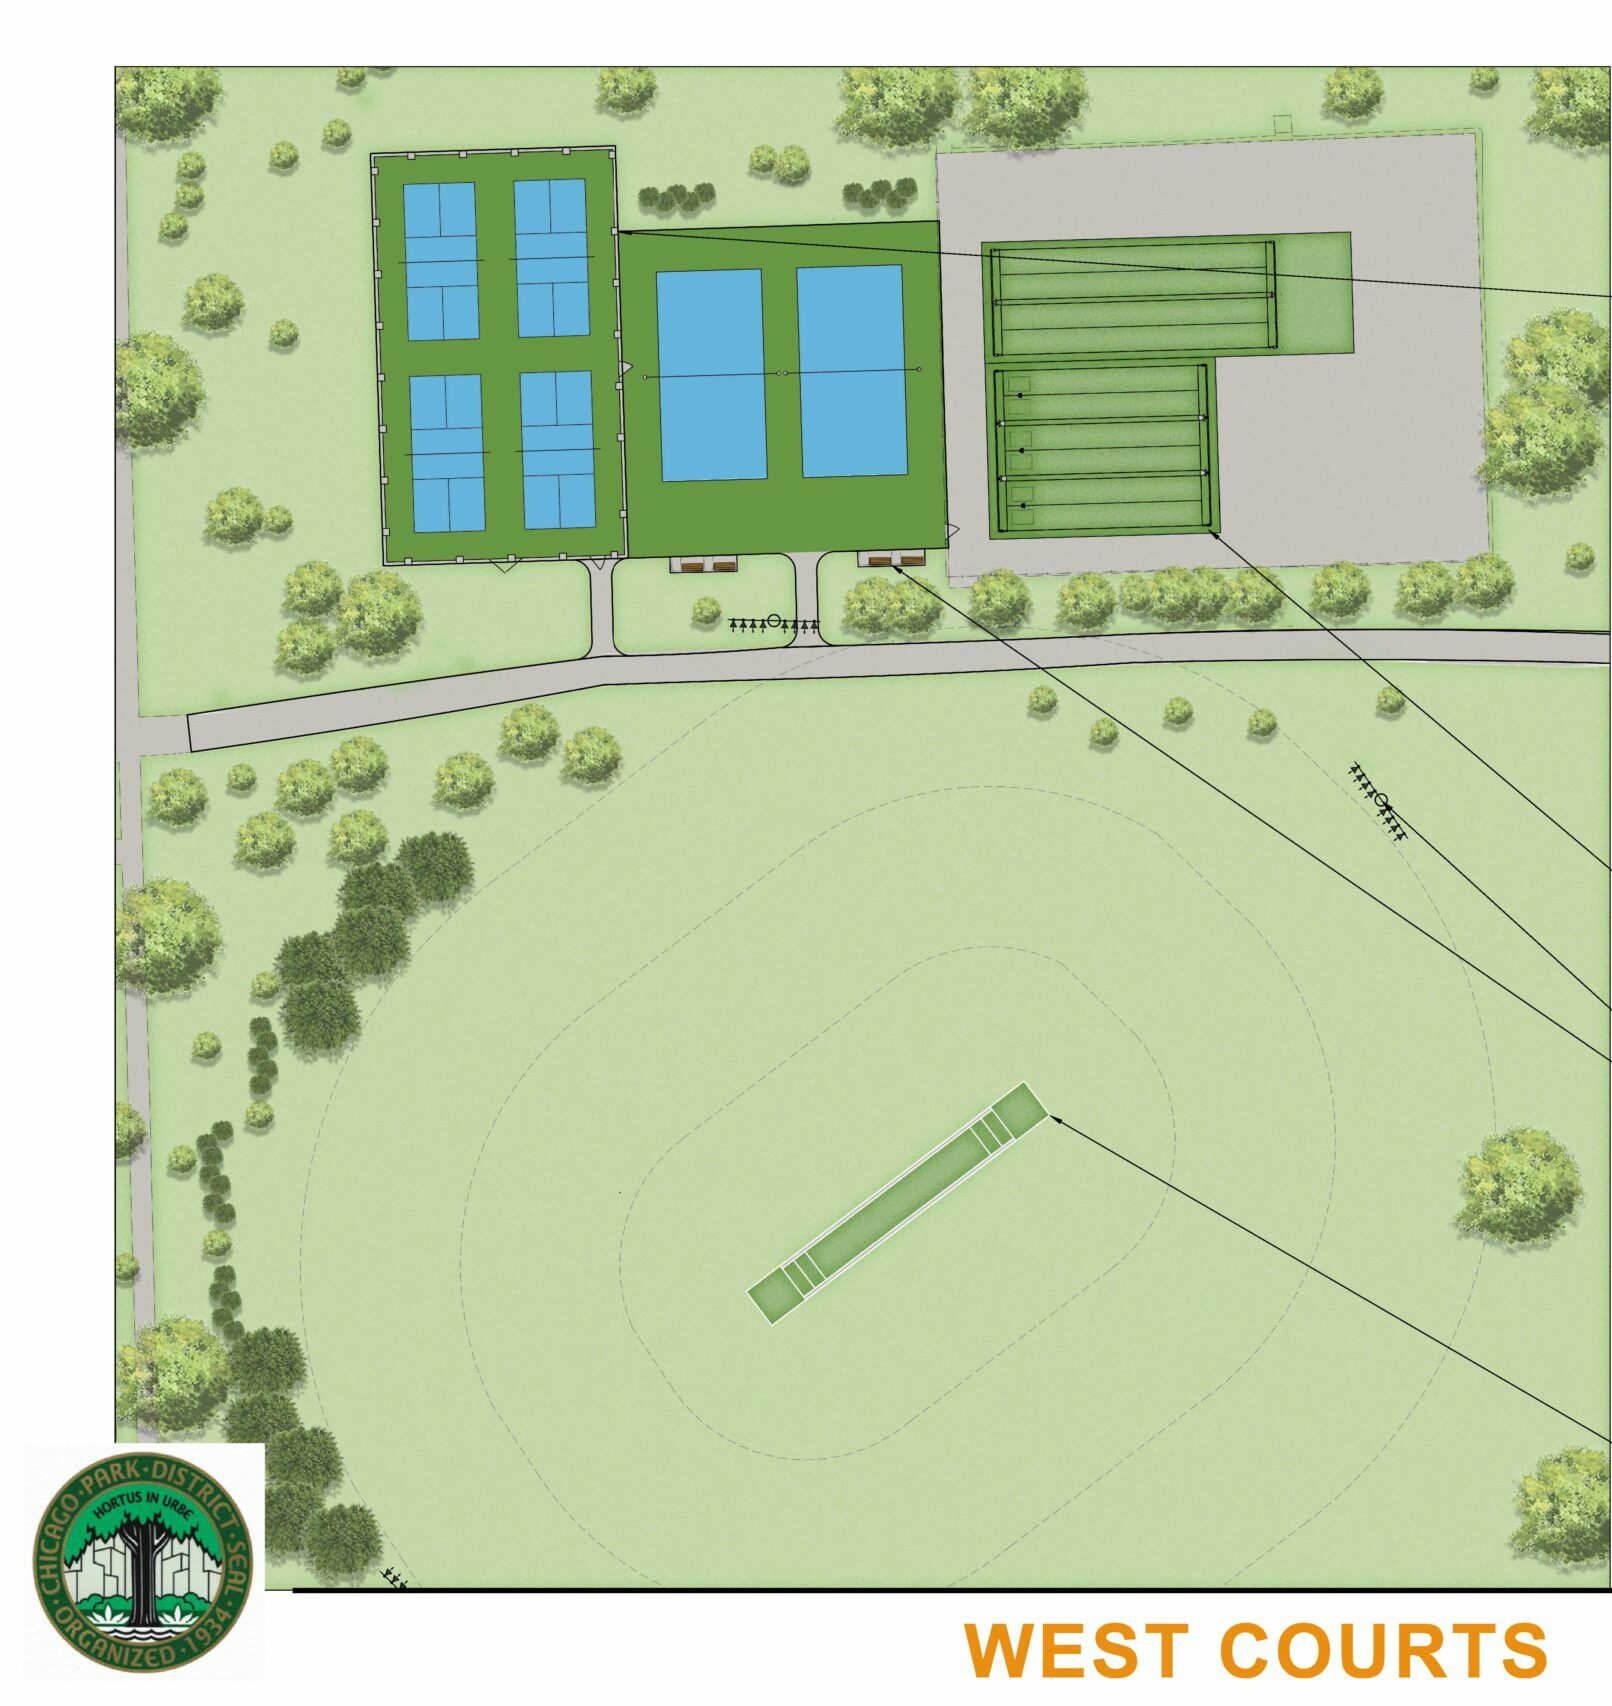 Overhead architectural drawing of Warren Park West Courts